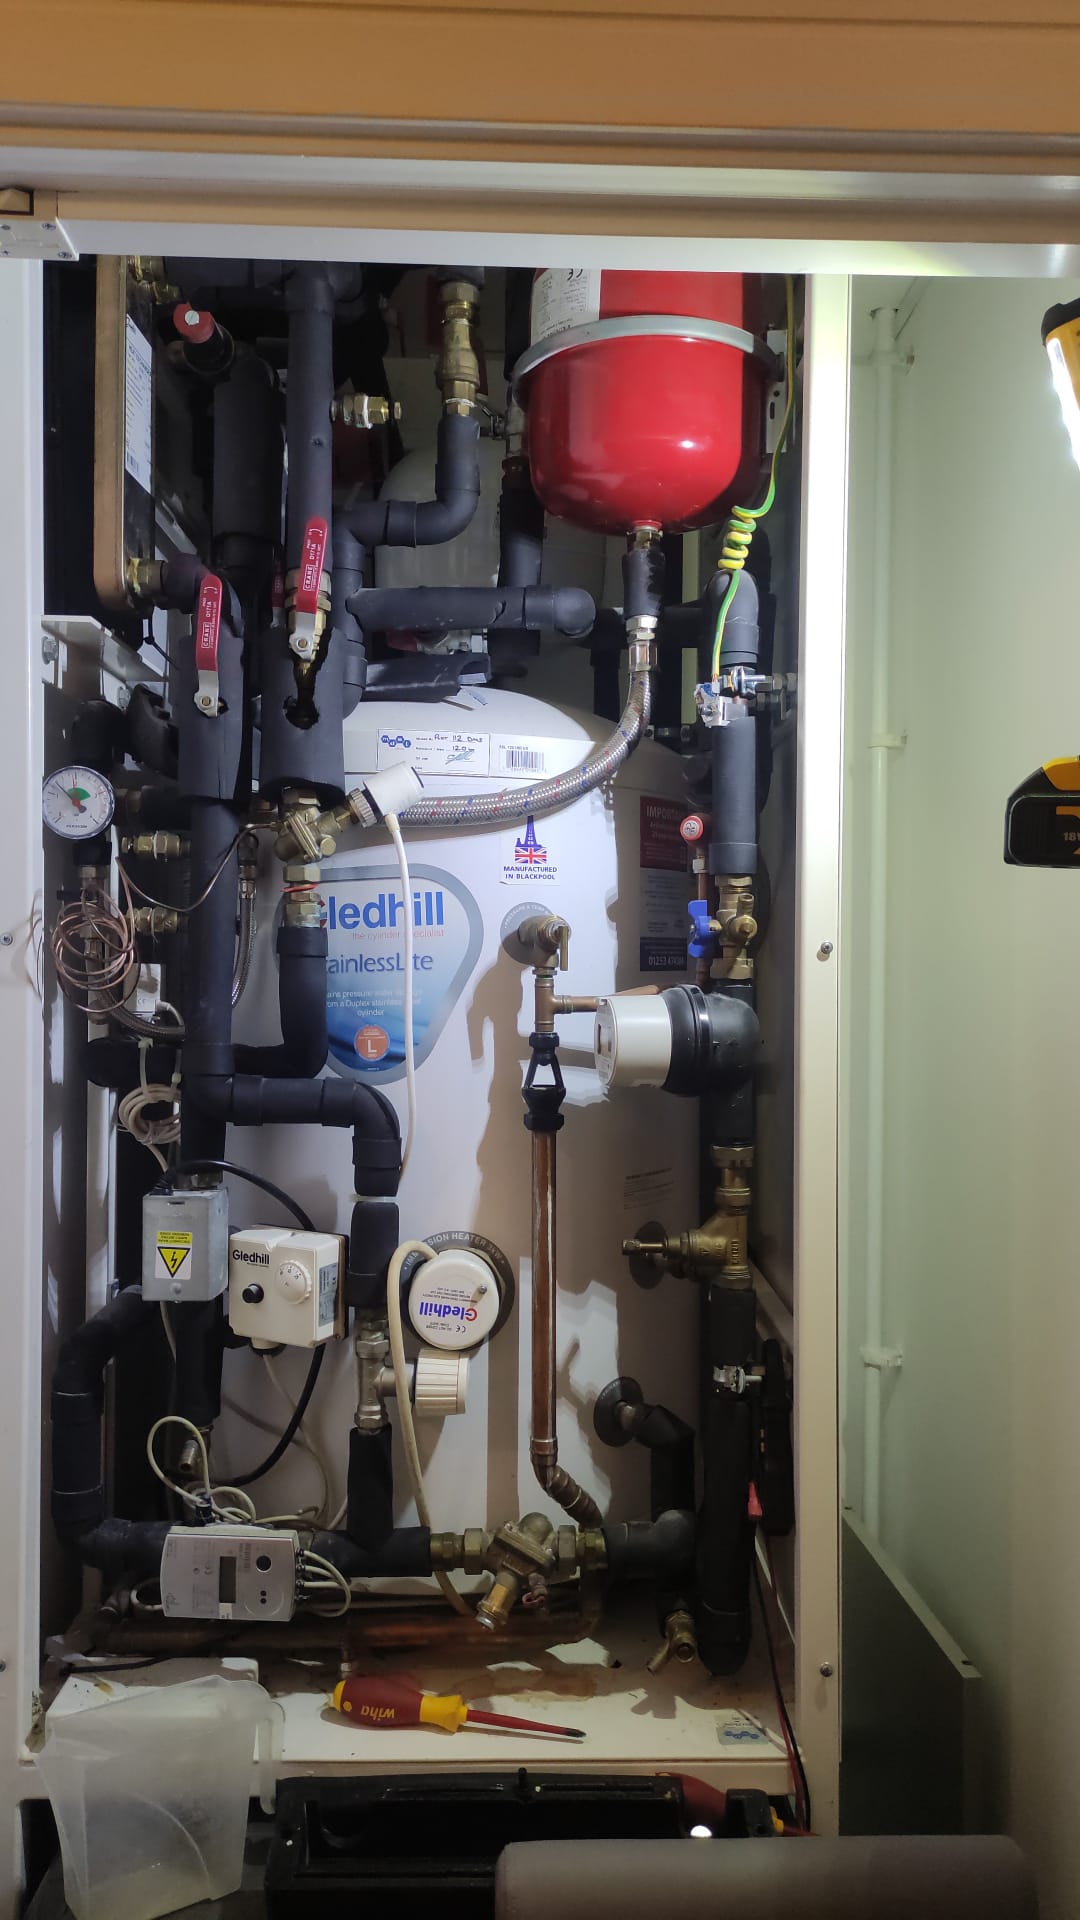 complex plumbing system, combi boiler and pipes around